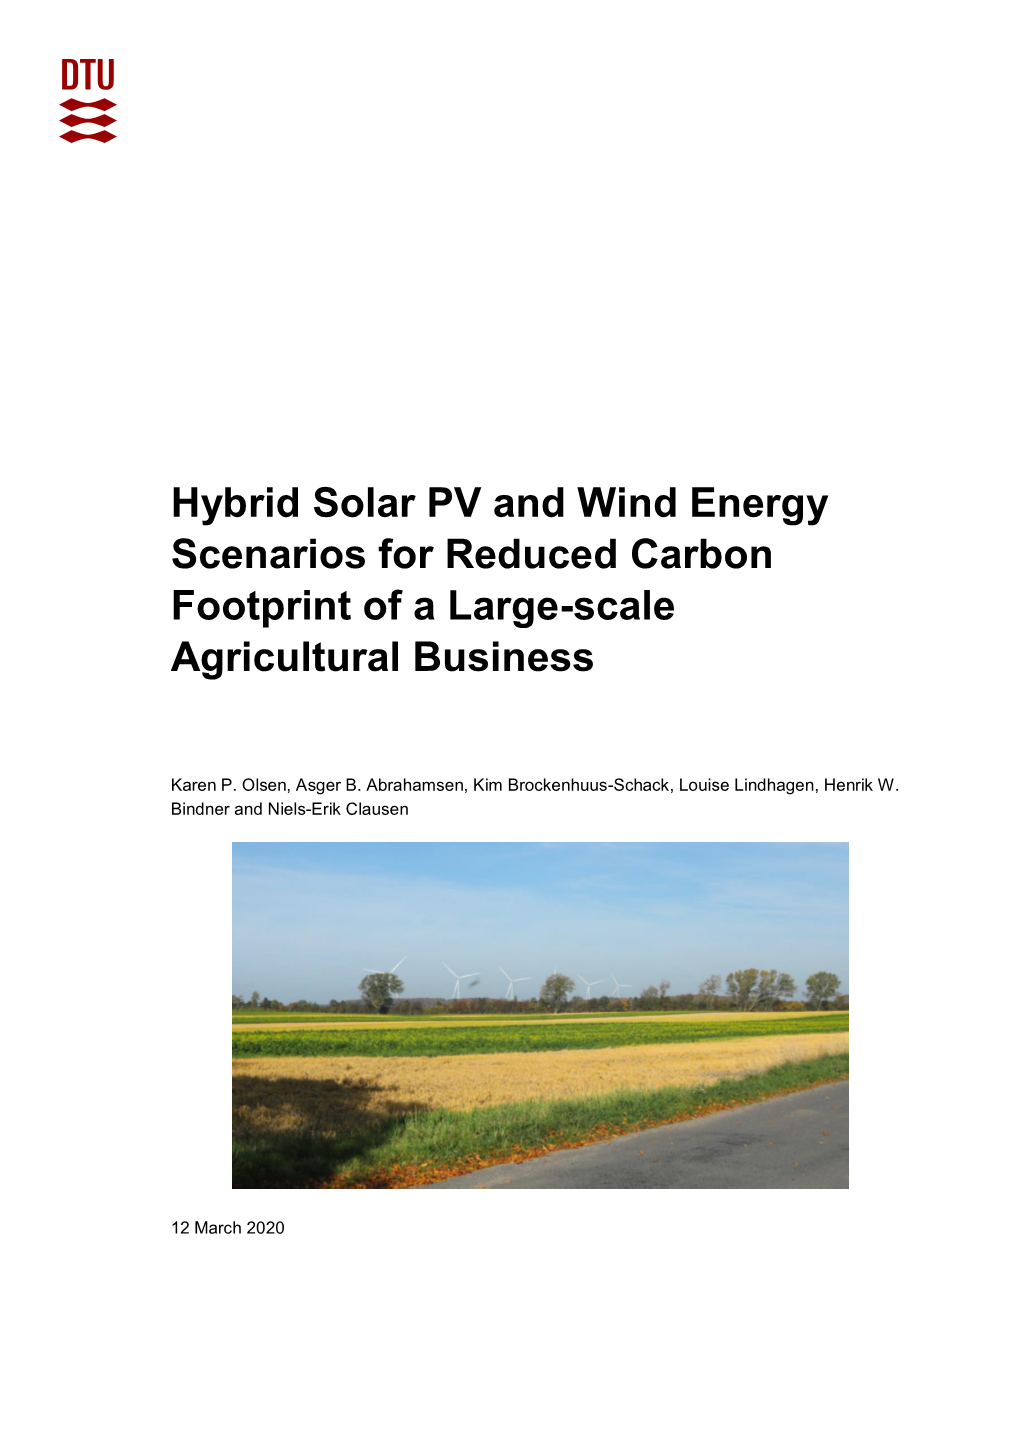 Hybrid Solar PV and Wind Energy Scenarios for Reduced Carbon Footprint of a Large-Scale Agricultural Business